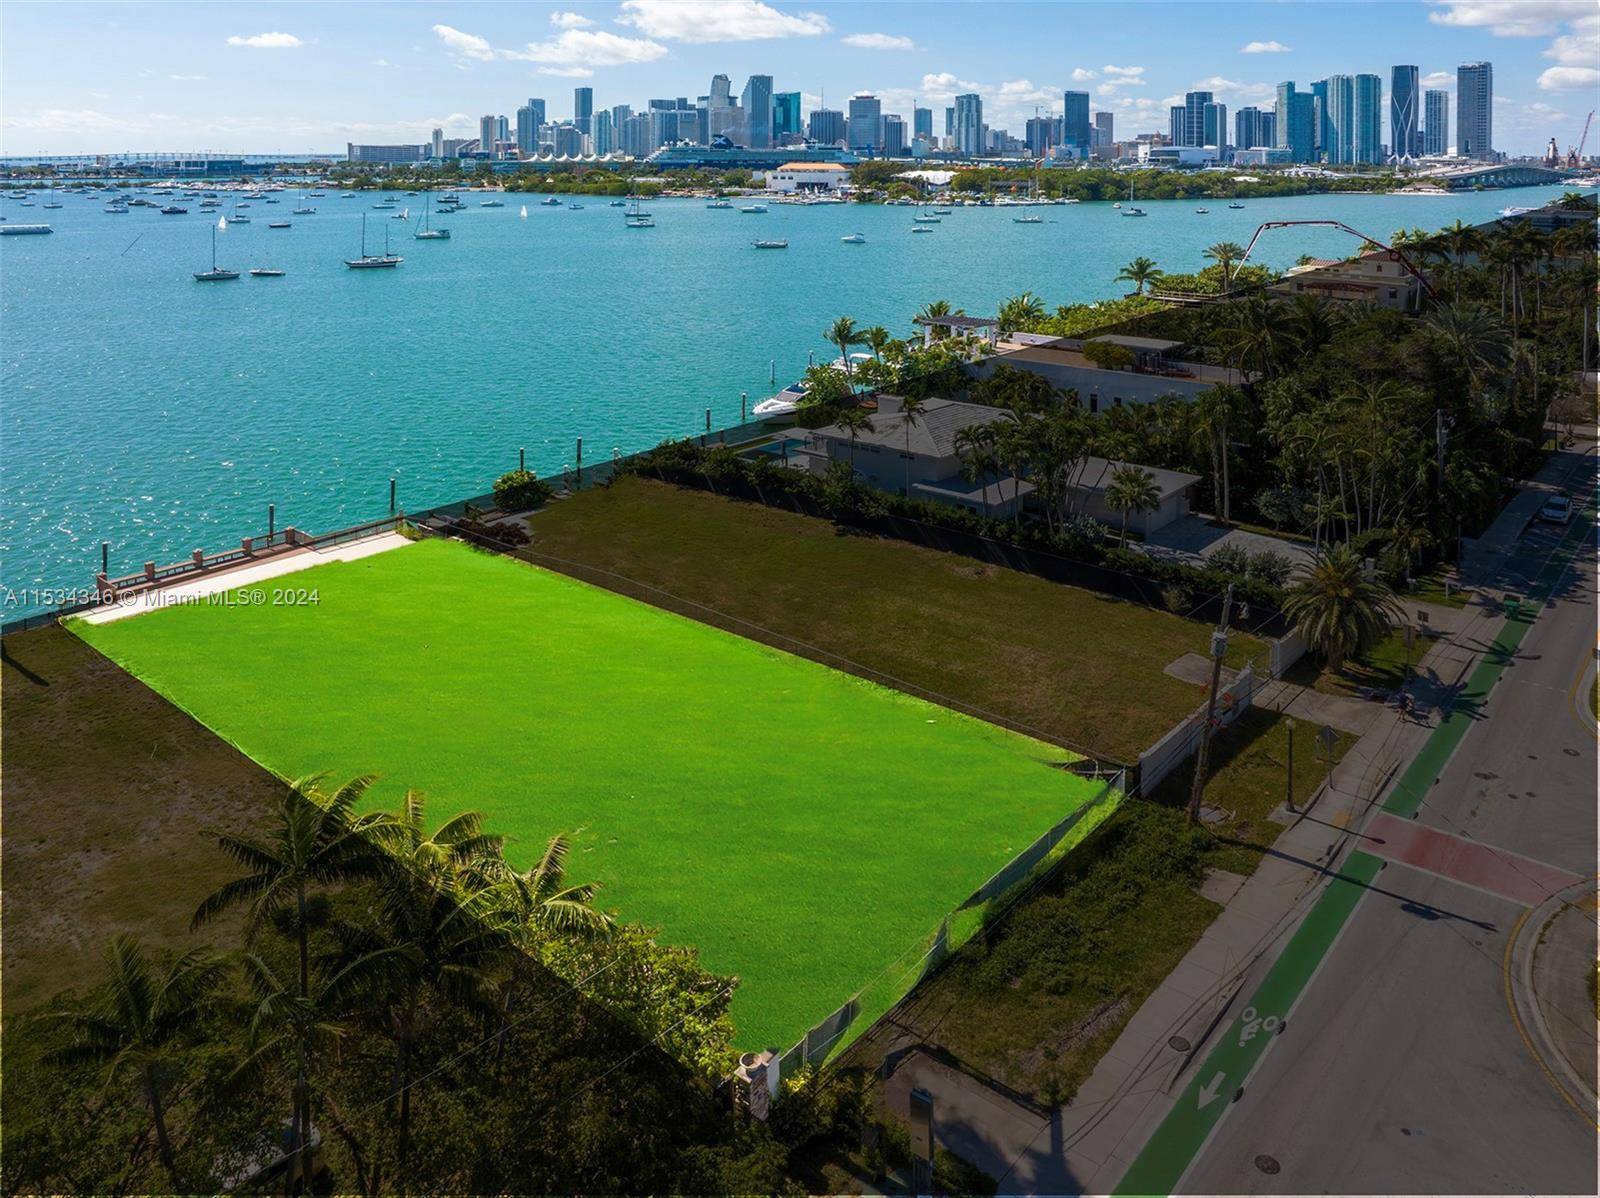 Discover this exquisite waterfront property nestled on the Venetian Islands, presenting a rare chance to build a magnificent estate in one of South Florida's most sought after locations.